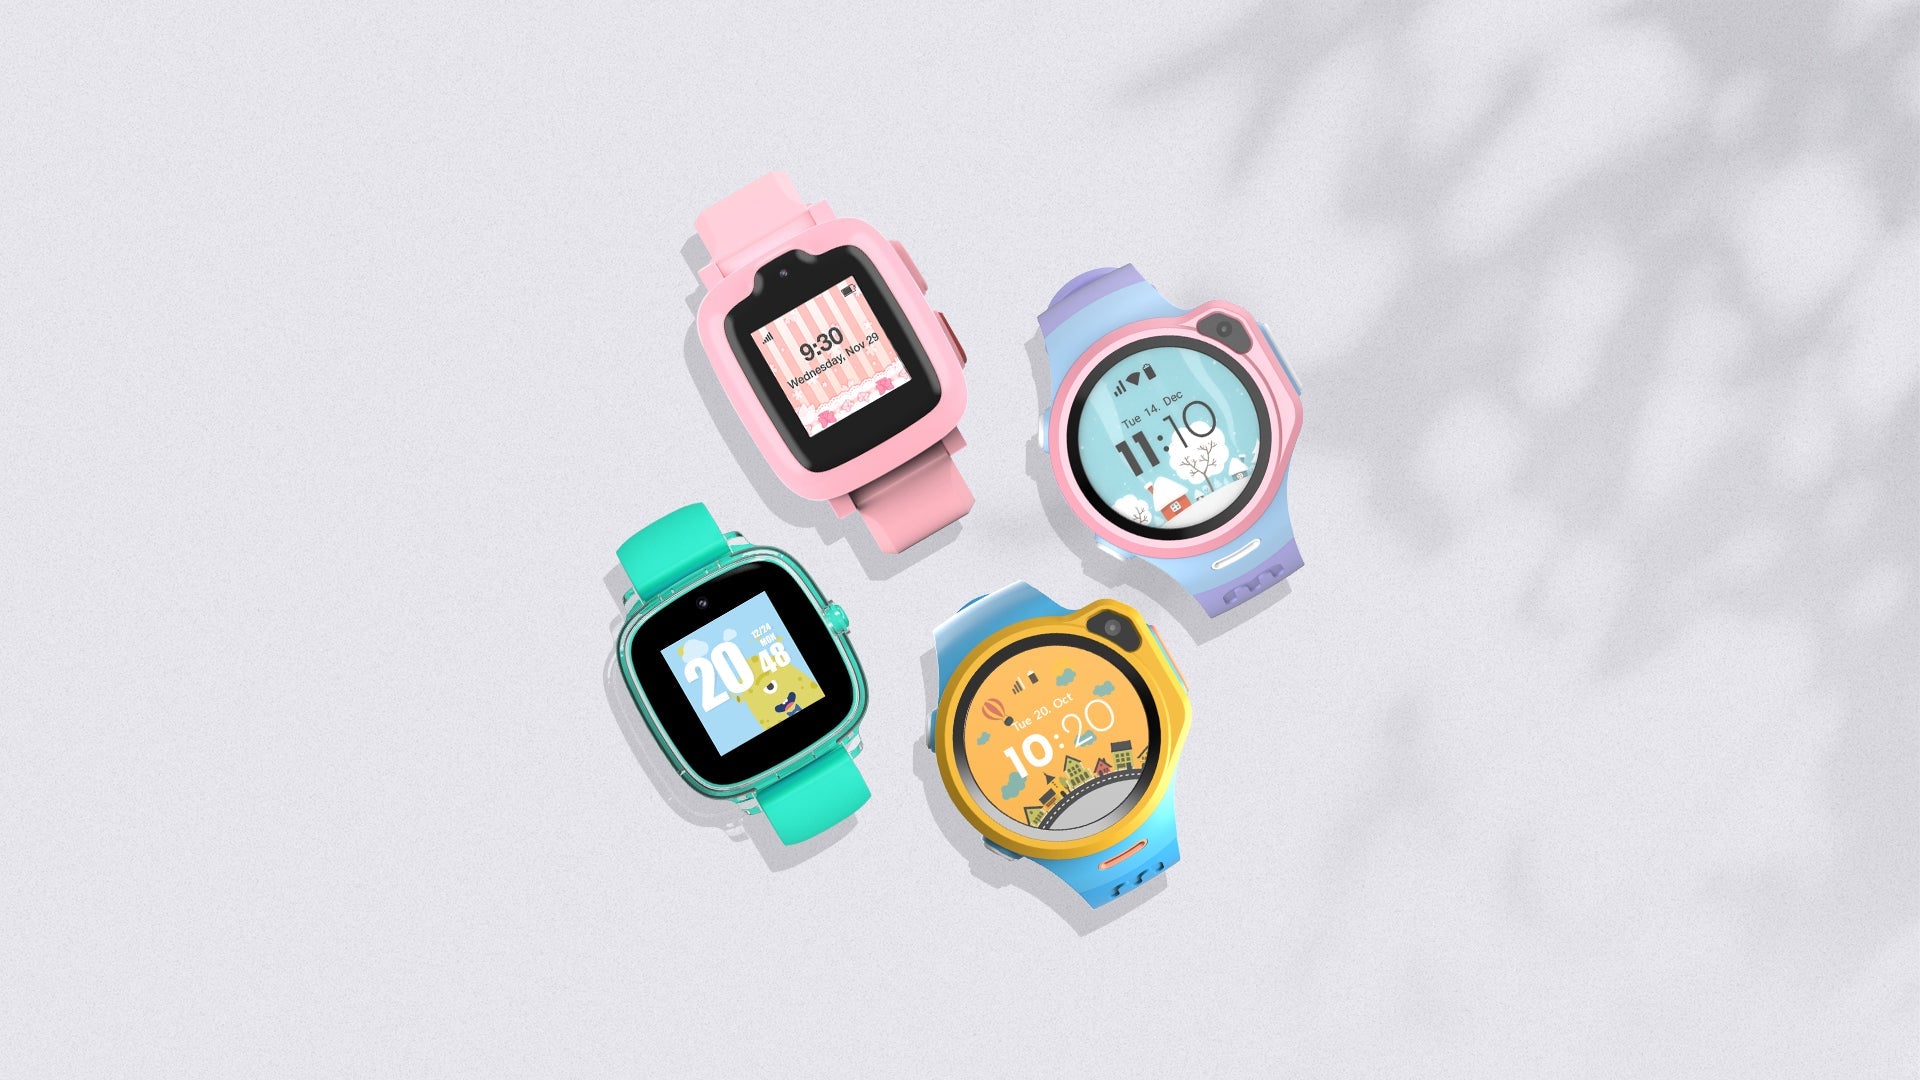 myFirst Watch Phone collection - Kids smart watch phone with GPS tracker and video call